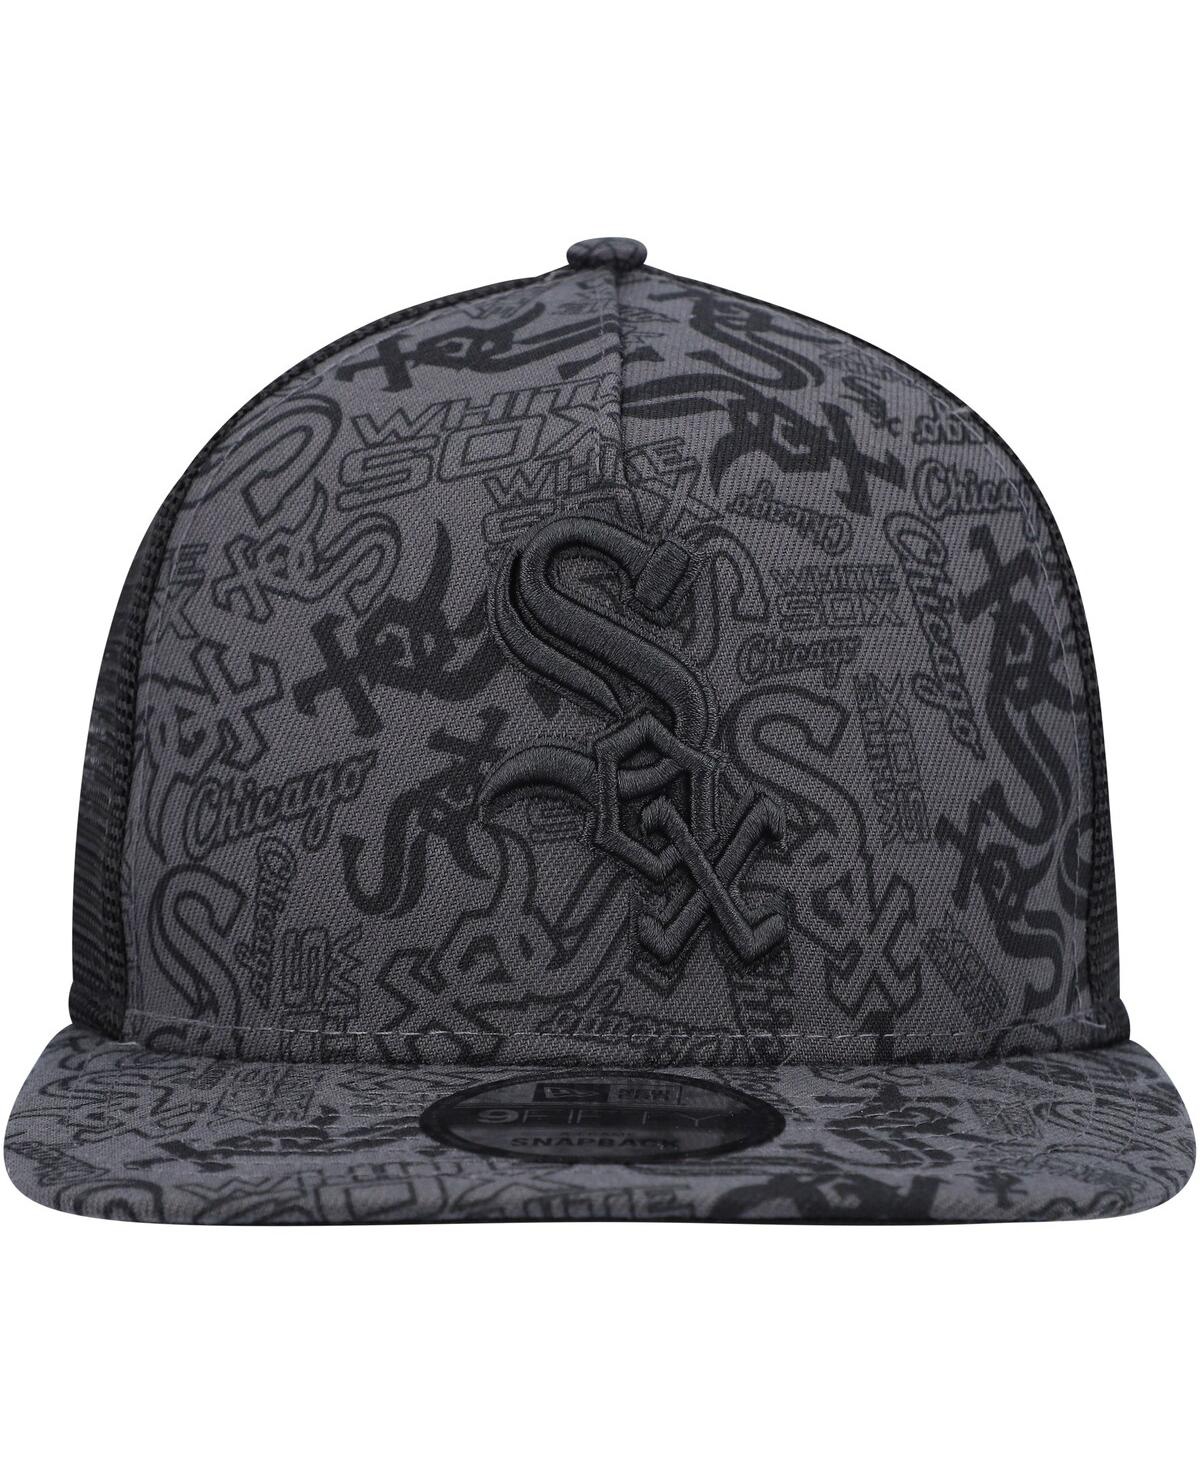 Shop New Era Men's  Black Chicago White Sox Repeat A-frame 9fifty Trucker Snapback Hat